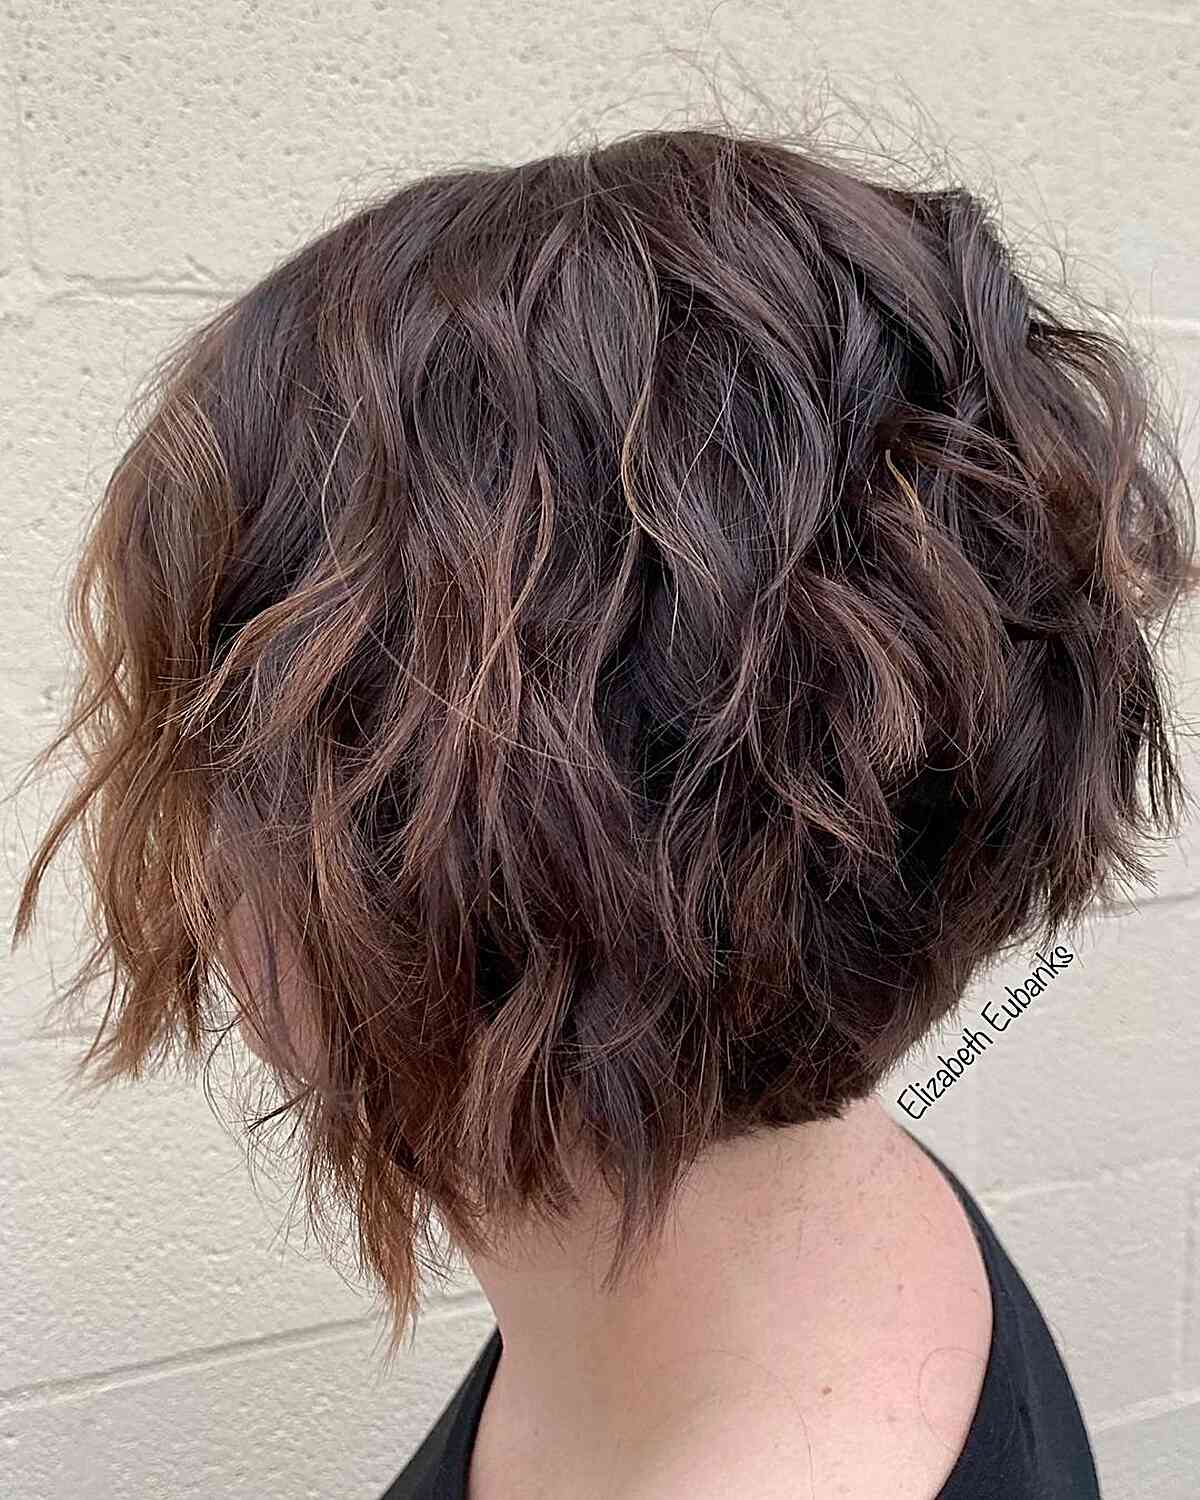 Short Choppy Angled Bob with Graduated Layers and Beach Waves